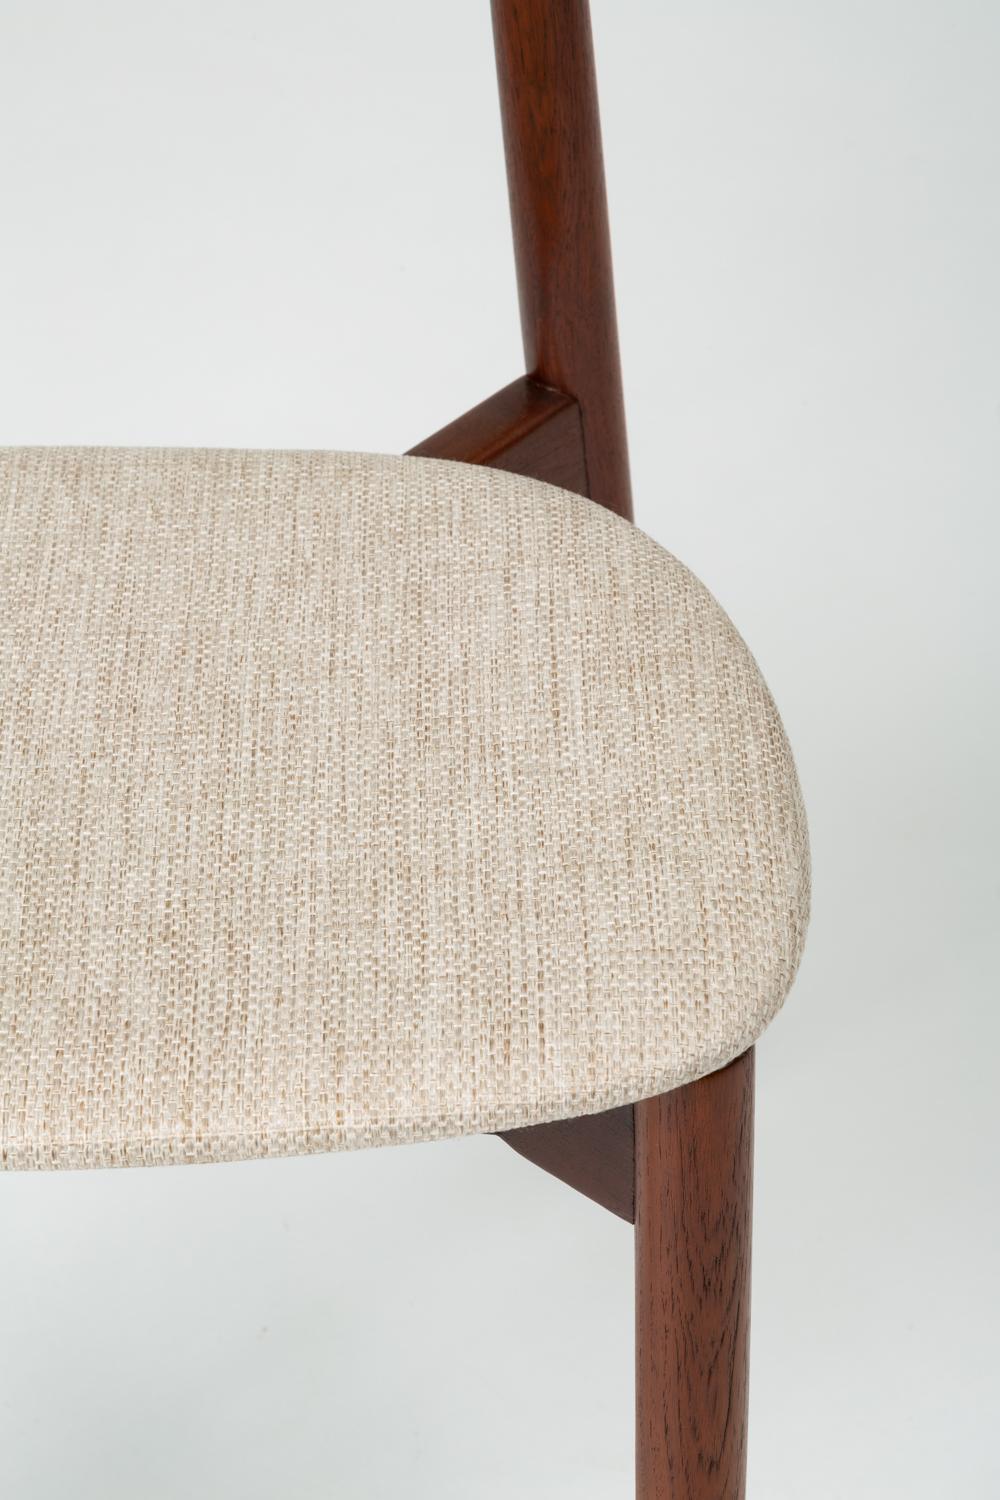 Single Dining or Accent Chair by Harry Østergaard for Randers Møbelfabrik 6